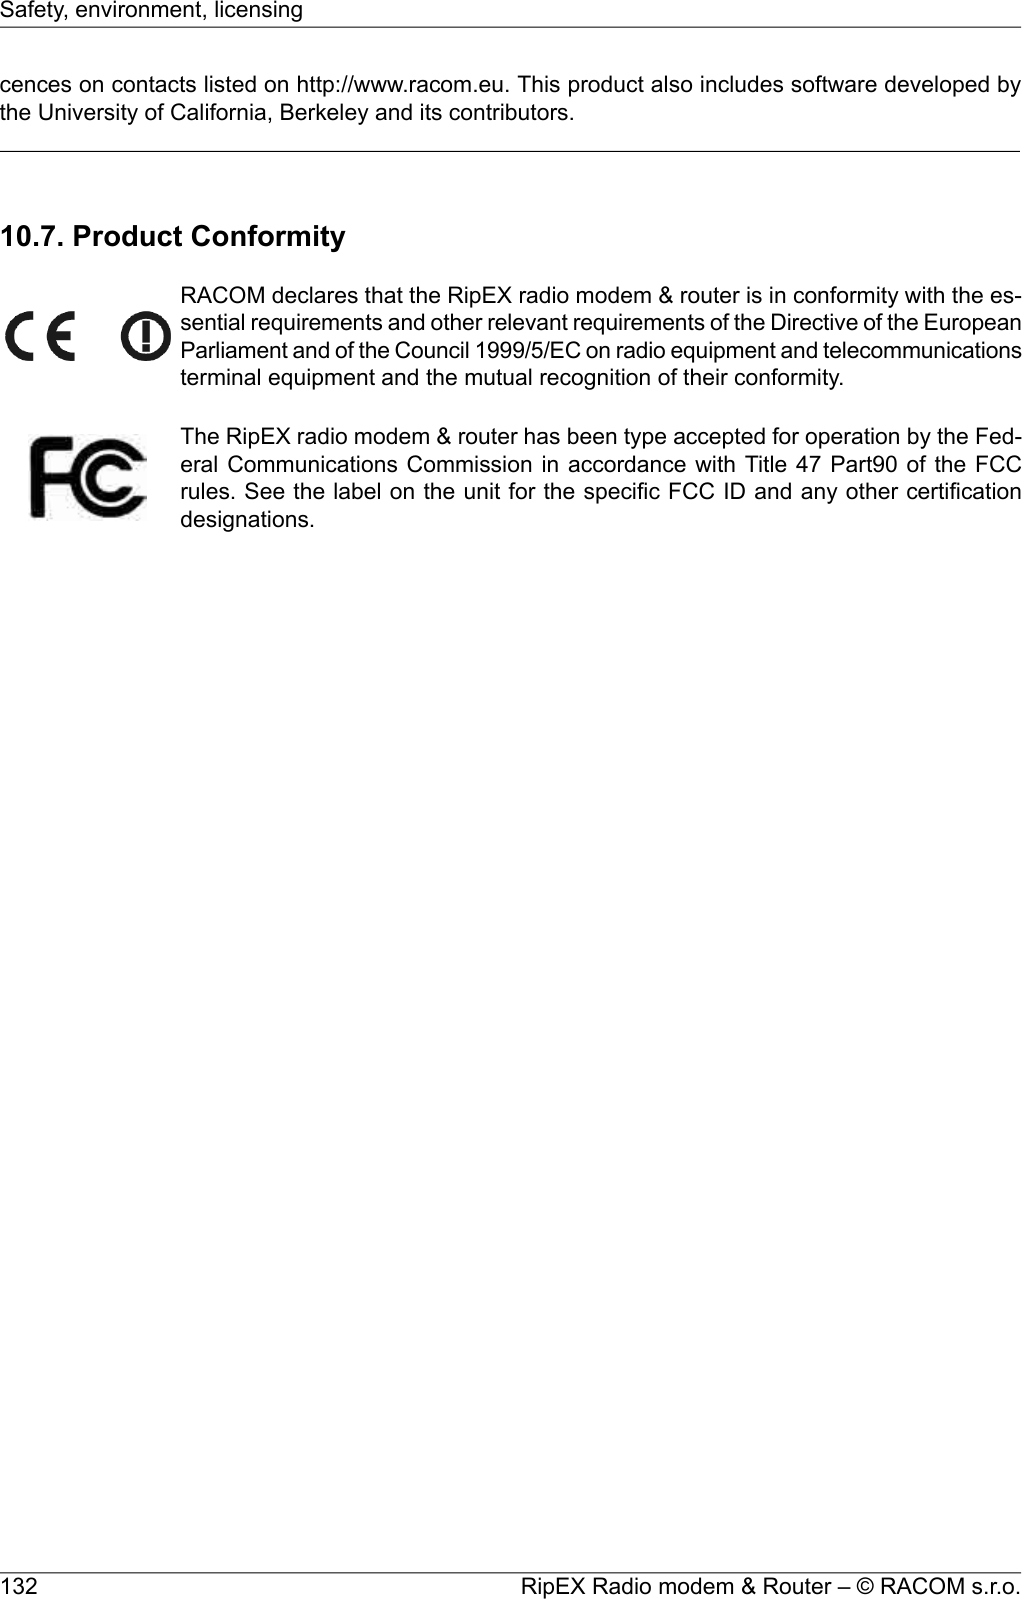 cences on contacts listed on http://www.racom.eu. This product also includes software developed bythe University of California, Berkeley and its contributors.10.7. Product ConformityRACOM declares that the RipEX radio modem &amp; router is in conformity with the es-sential requirements and other relevant requirements of the Directive of the EuropeanParliament and of the Council 1999/5/EC on radio equipment and telecommunicationsterminal equipment and the mutual recognition of their conformity.The RipEX radio modem &amp; router has been type accepted for operation by the Fed-eral Communications Commission in accordance with Title 47 Part90 of the FCCrules. See the label on the unit for the specific FCC ID and any other certificationdesignations.RipEX Radio modem &amp; Router – © RACOM s.r.o.132Safety, environment, licensing